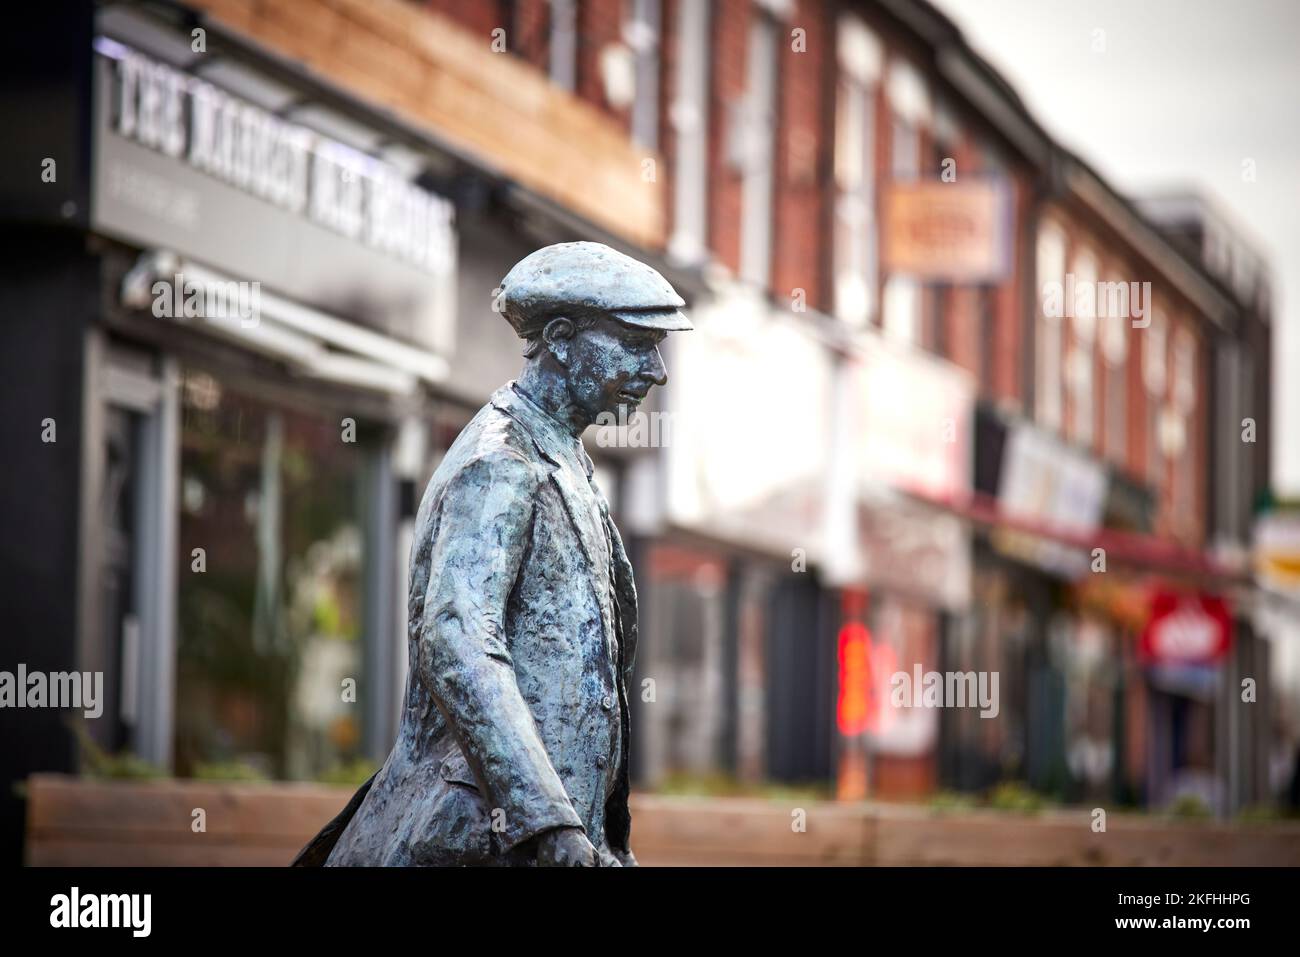 Leyland town in South Ribble and county of Lancashire, England. Leyland walking man statue depicting a factory worker leaving work Stock Photo